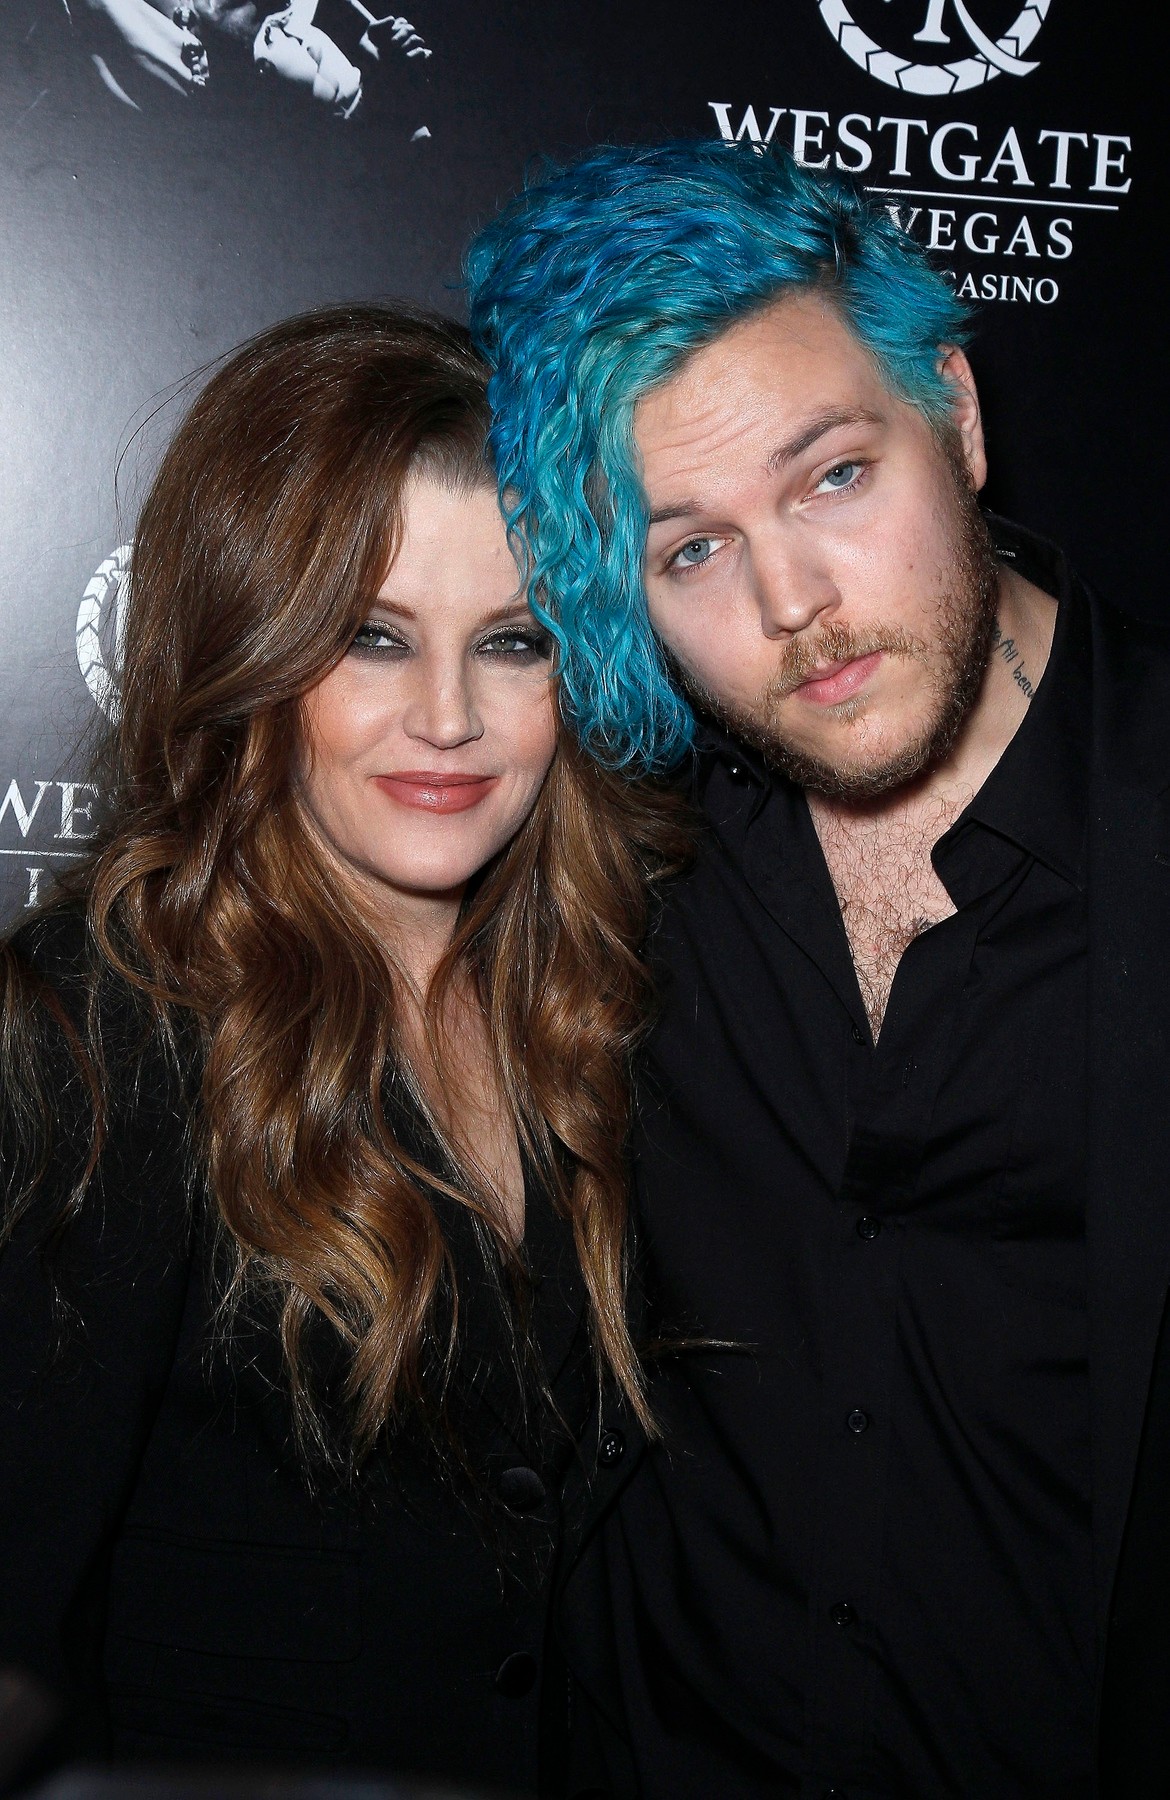 Las Vegas, NV  - Benjamin Keough, Son of Lisa Marie Presley and Grandson of Elvis Presley, Dead at 27 From Apparent Suicide. File photo: 23 April 2015 - Las Vegas, Nevada - Lisa Marie Presley, Benjamin Keough. Red Carpet Premiere of “The Elvis Experience” Musical Production at The Westgate Las Vegas Resort and Casino.

BACKGRID USA 13 JULY 2020,Image: 542267395, License: Rights-managed, Restrictions: , Model Release: no, Credit line: MediaPunch / BACKGRID / Backgrid USA / Profimedia